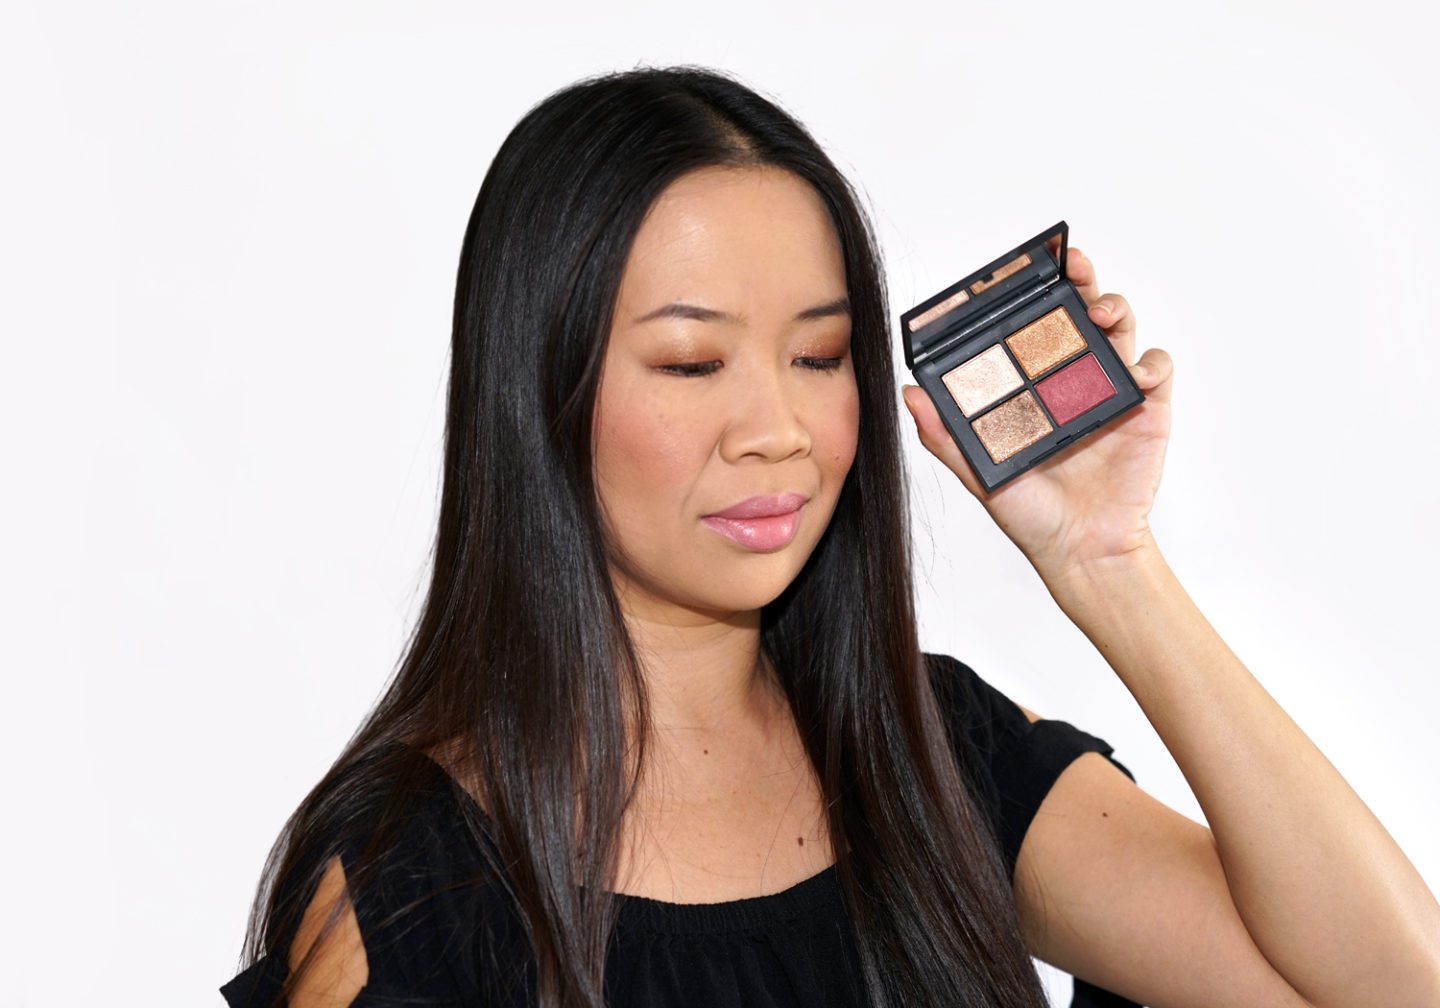 NARS Eyeshadow Quad in Singapore + Lipstick in Disobedience | The Beauty Look Book